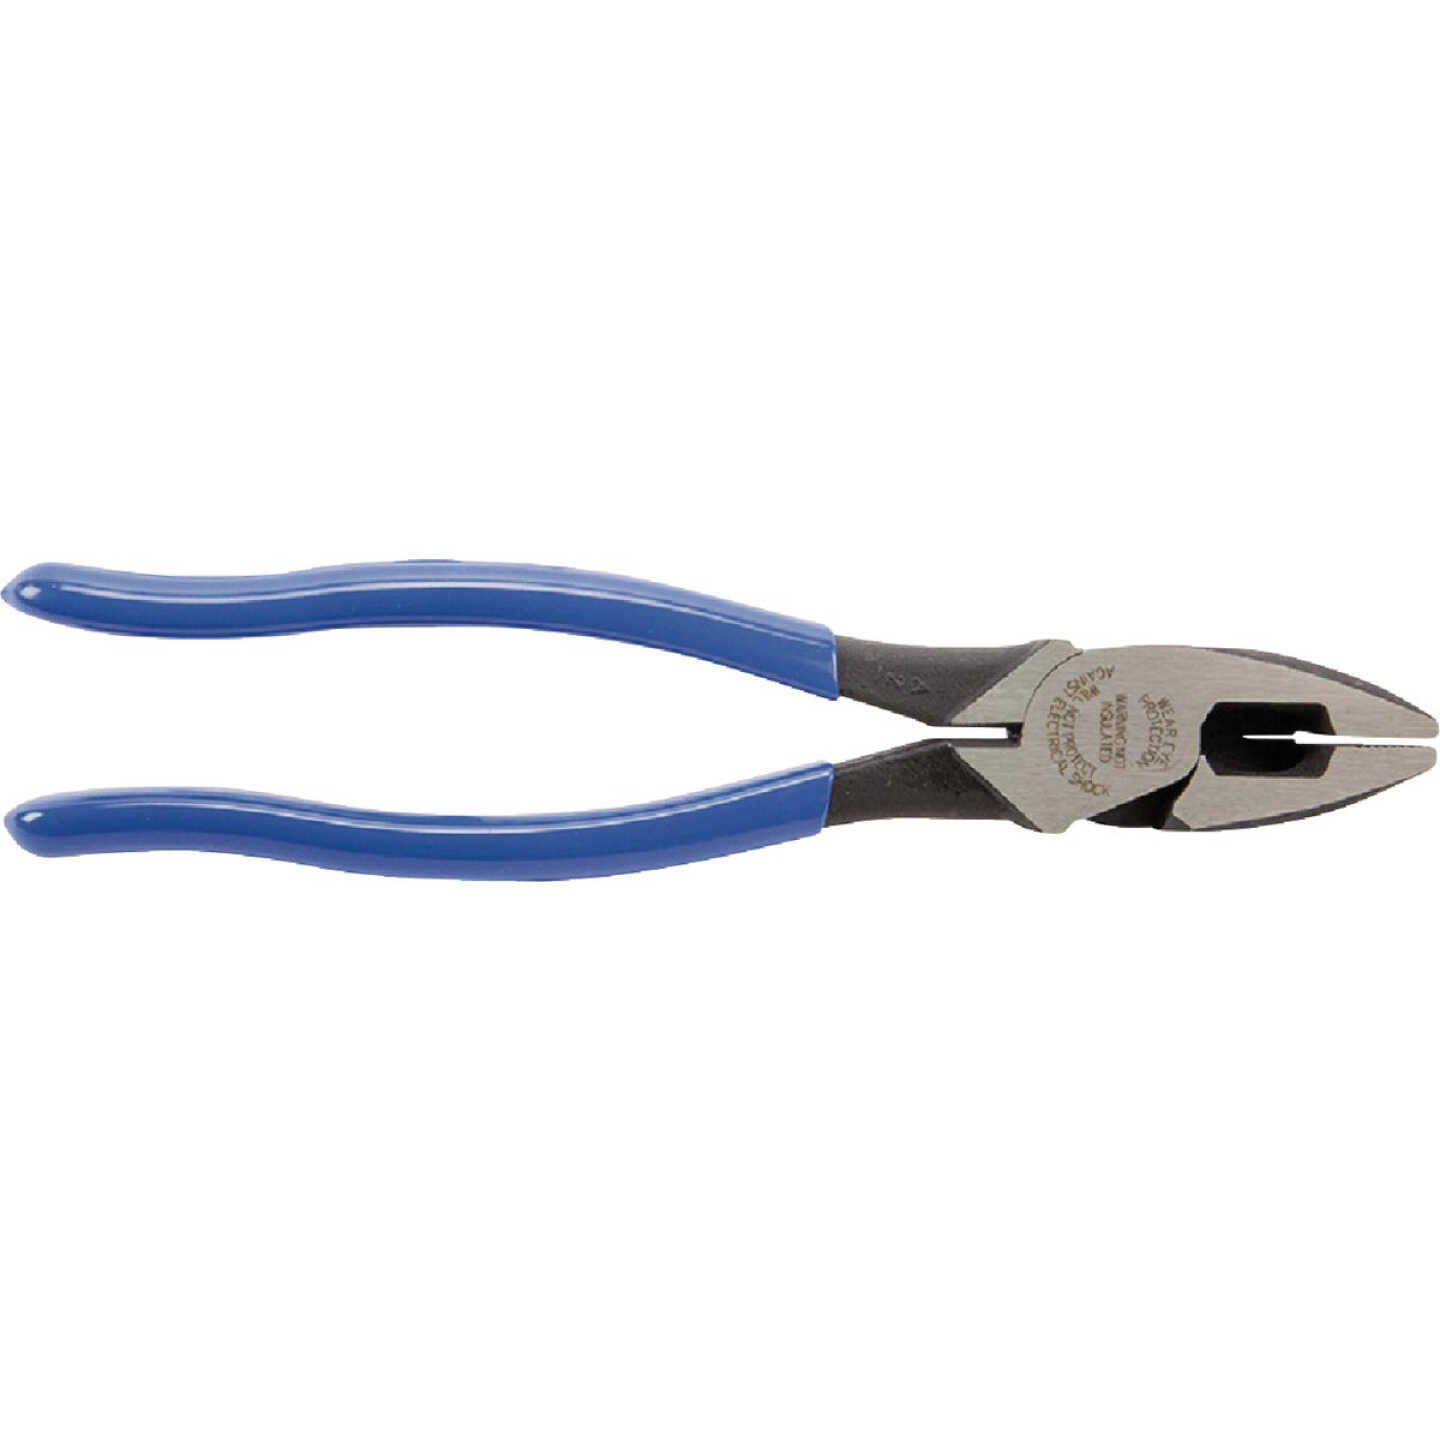 Car Vehicle Soldering Aid Plier Metal Wire Welding Clamp Strong